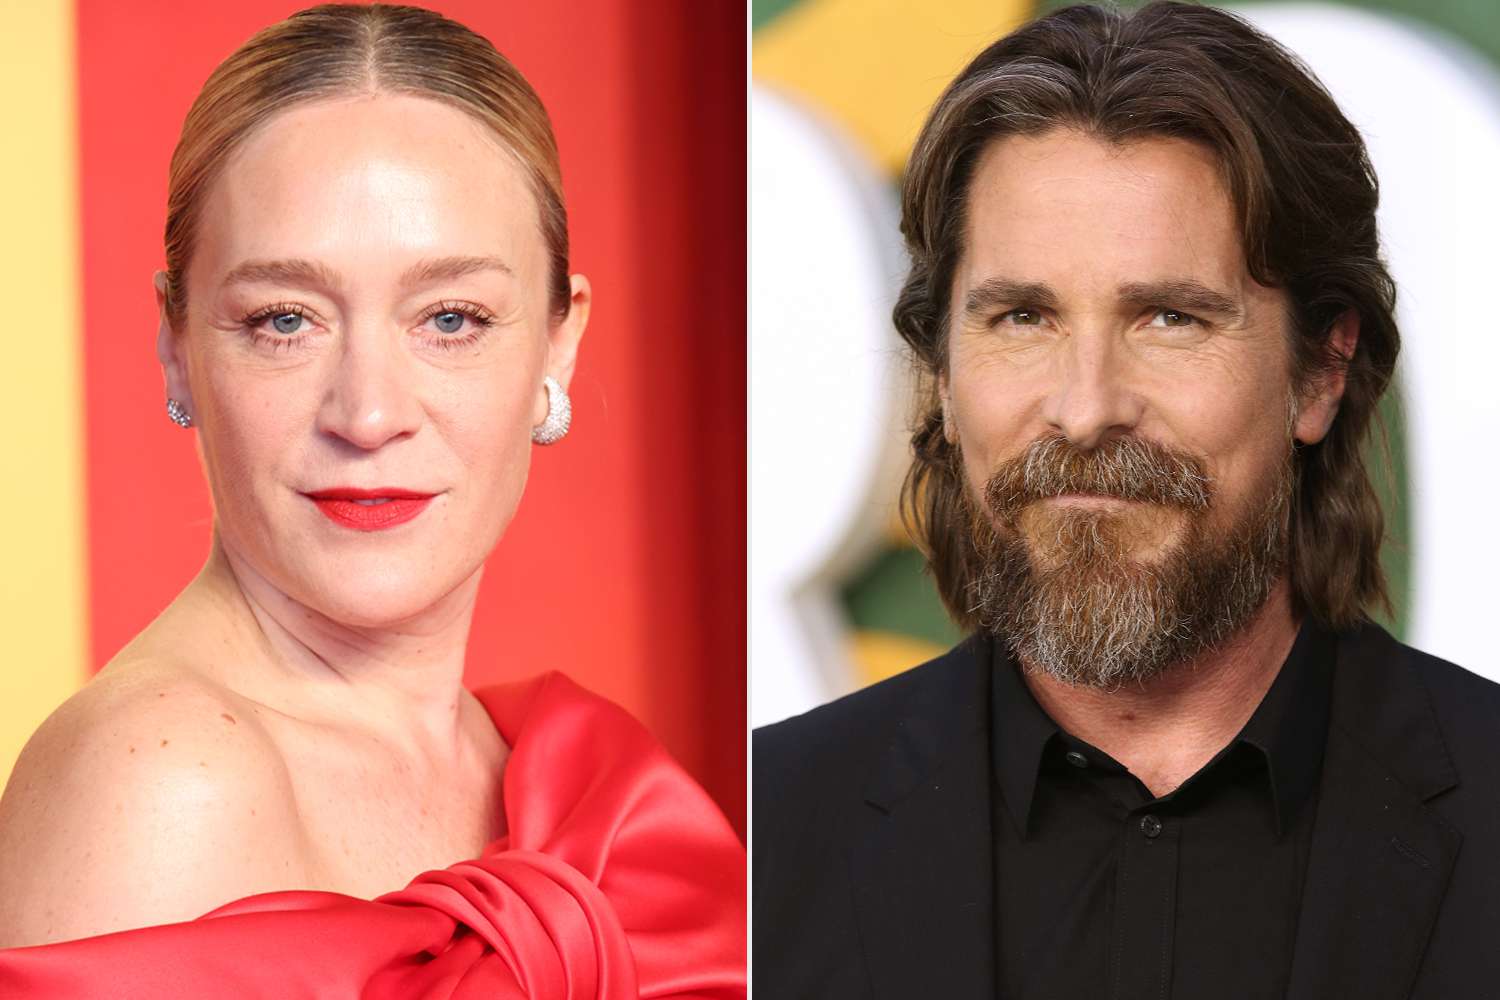 Chloë Sevigny Felt 'Really Intimidated' by Christian Bale on American Psycho Set: His 'Process' Was 'Challenging'